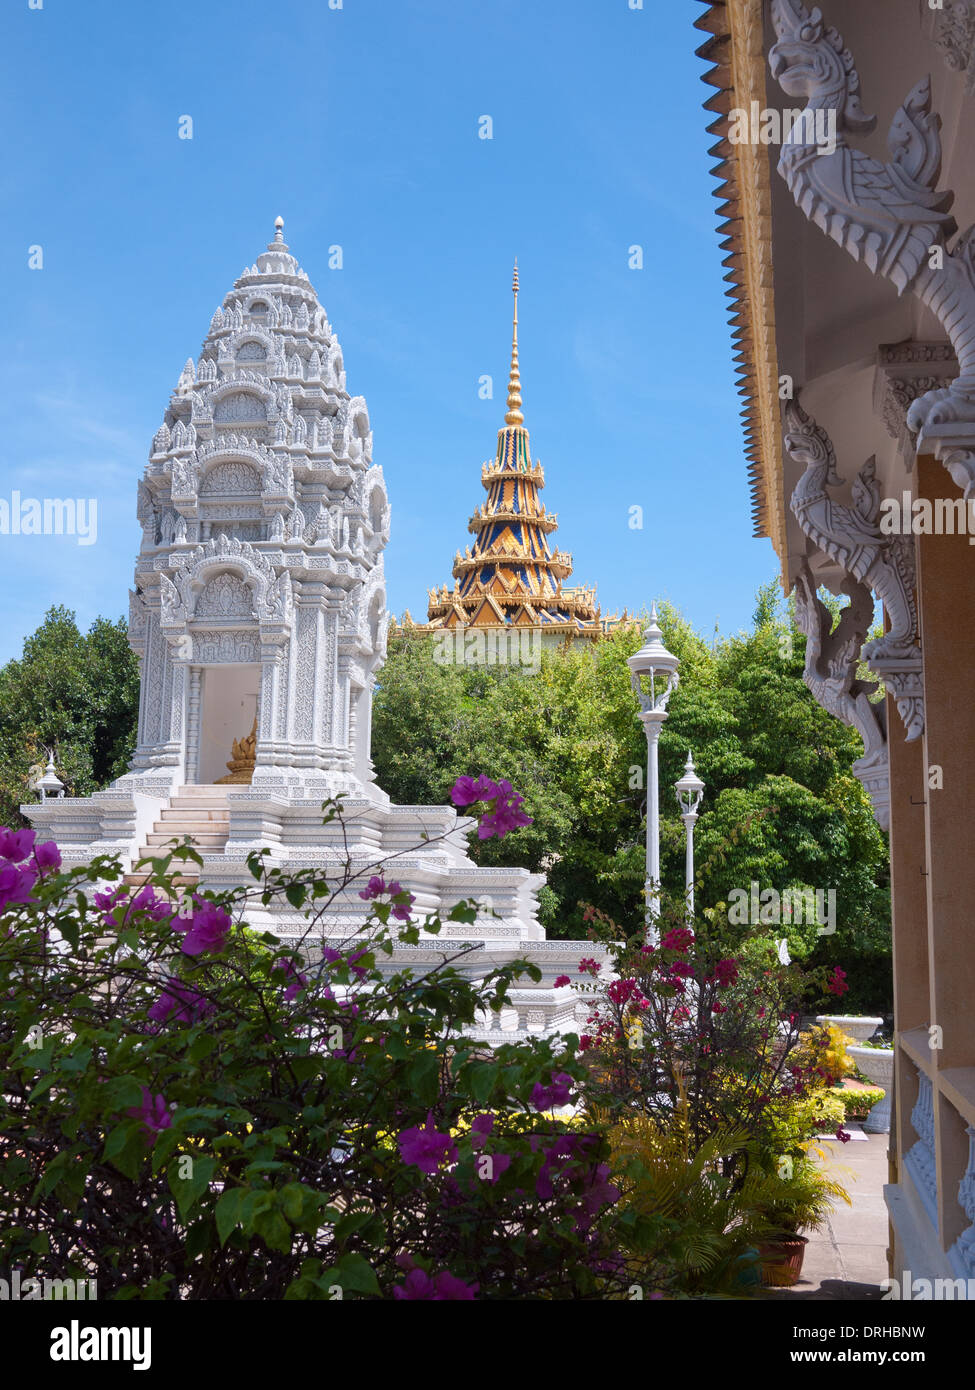 A view of the Stupa of Princess Kantha Bopha on the Royal Palace grounds in Phnom Penh, Cambodia. Stock Photo